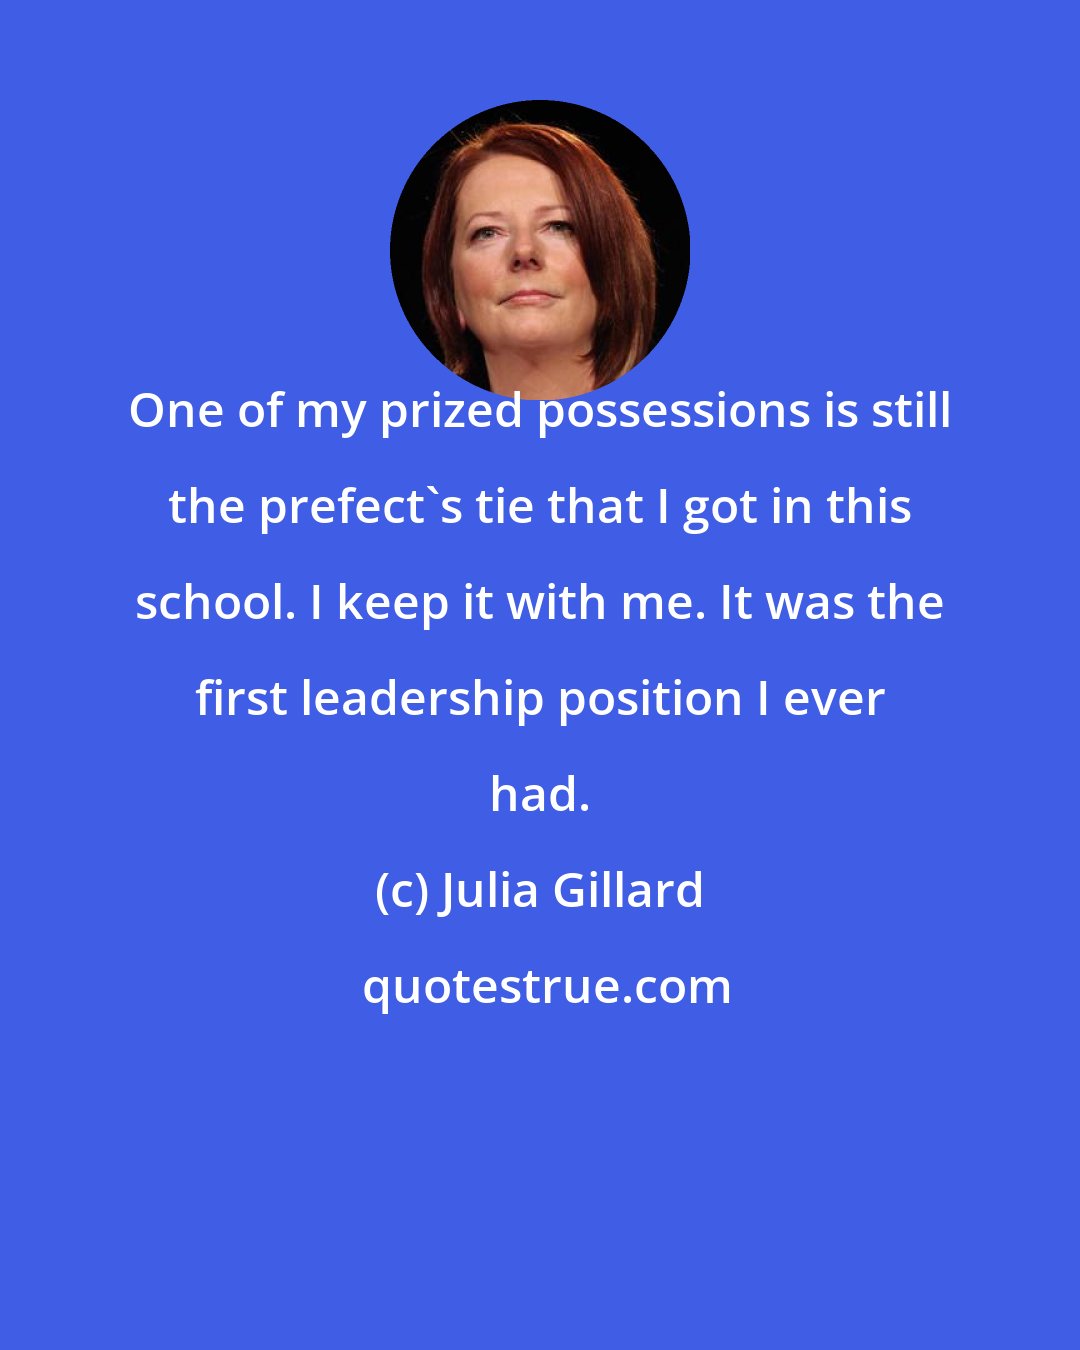 Julia Gillard: One of my prized possessions is still the prefect's tie that I got in this school. I keep it with me. It was the first leadership position I ever had.